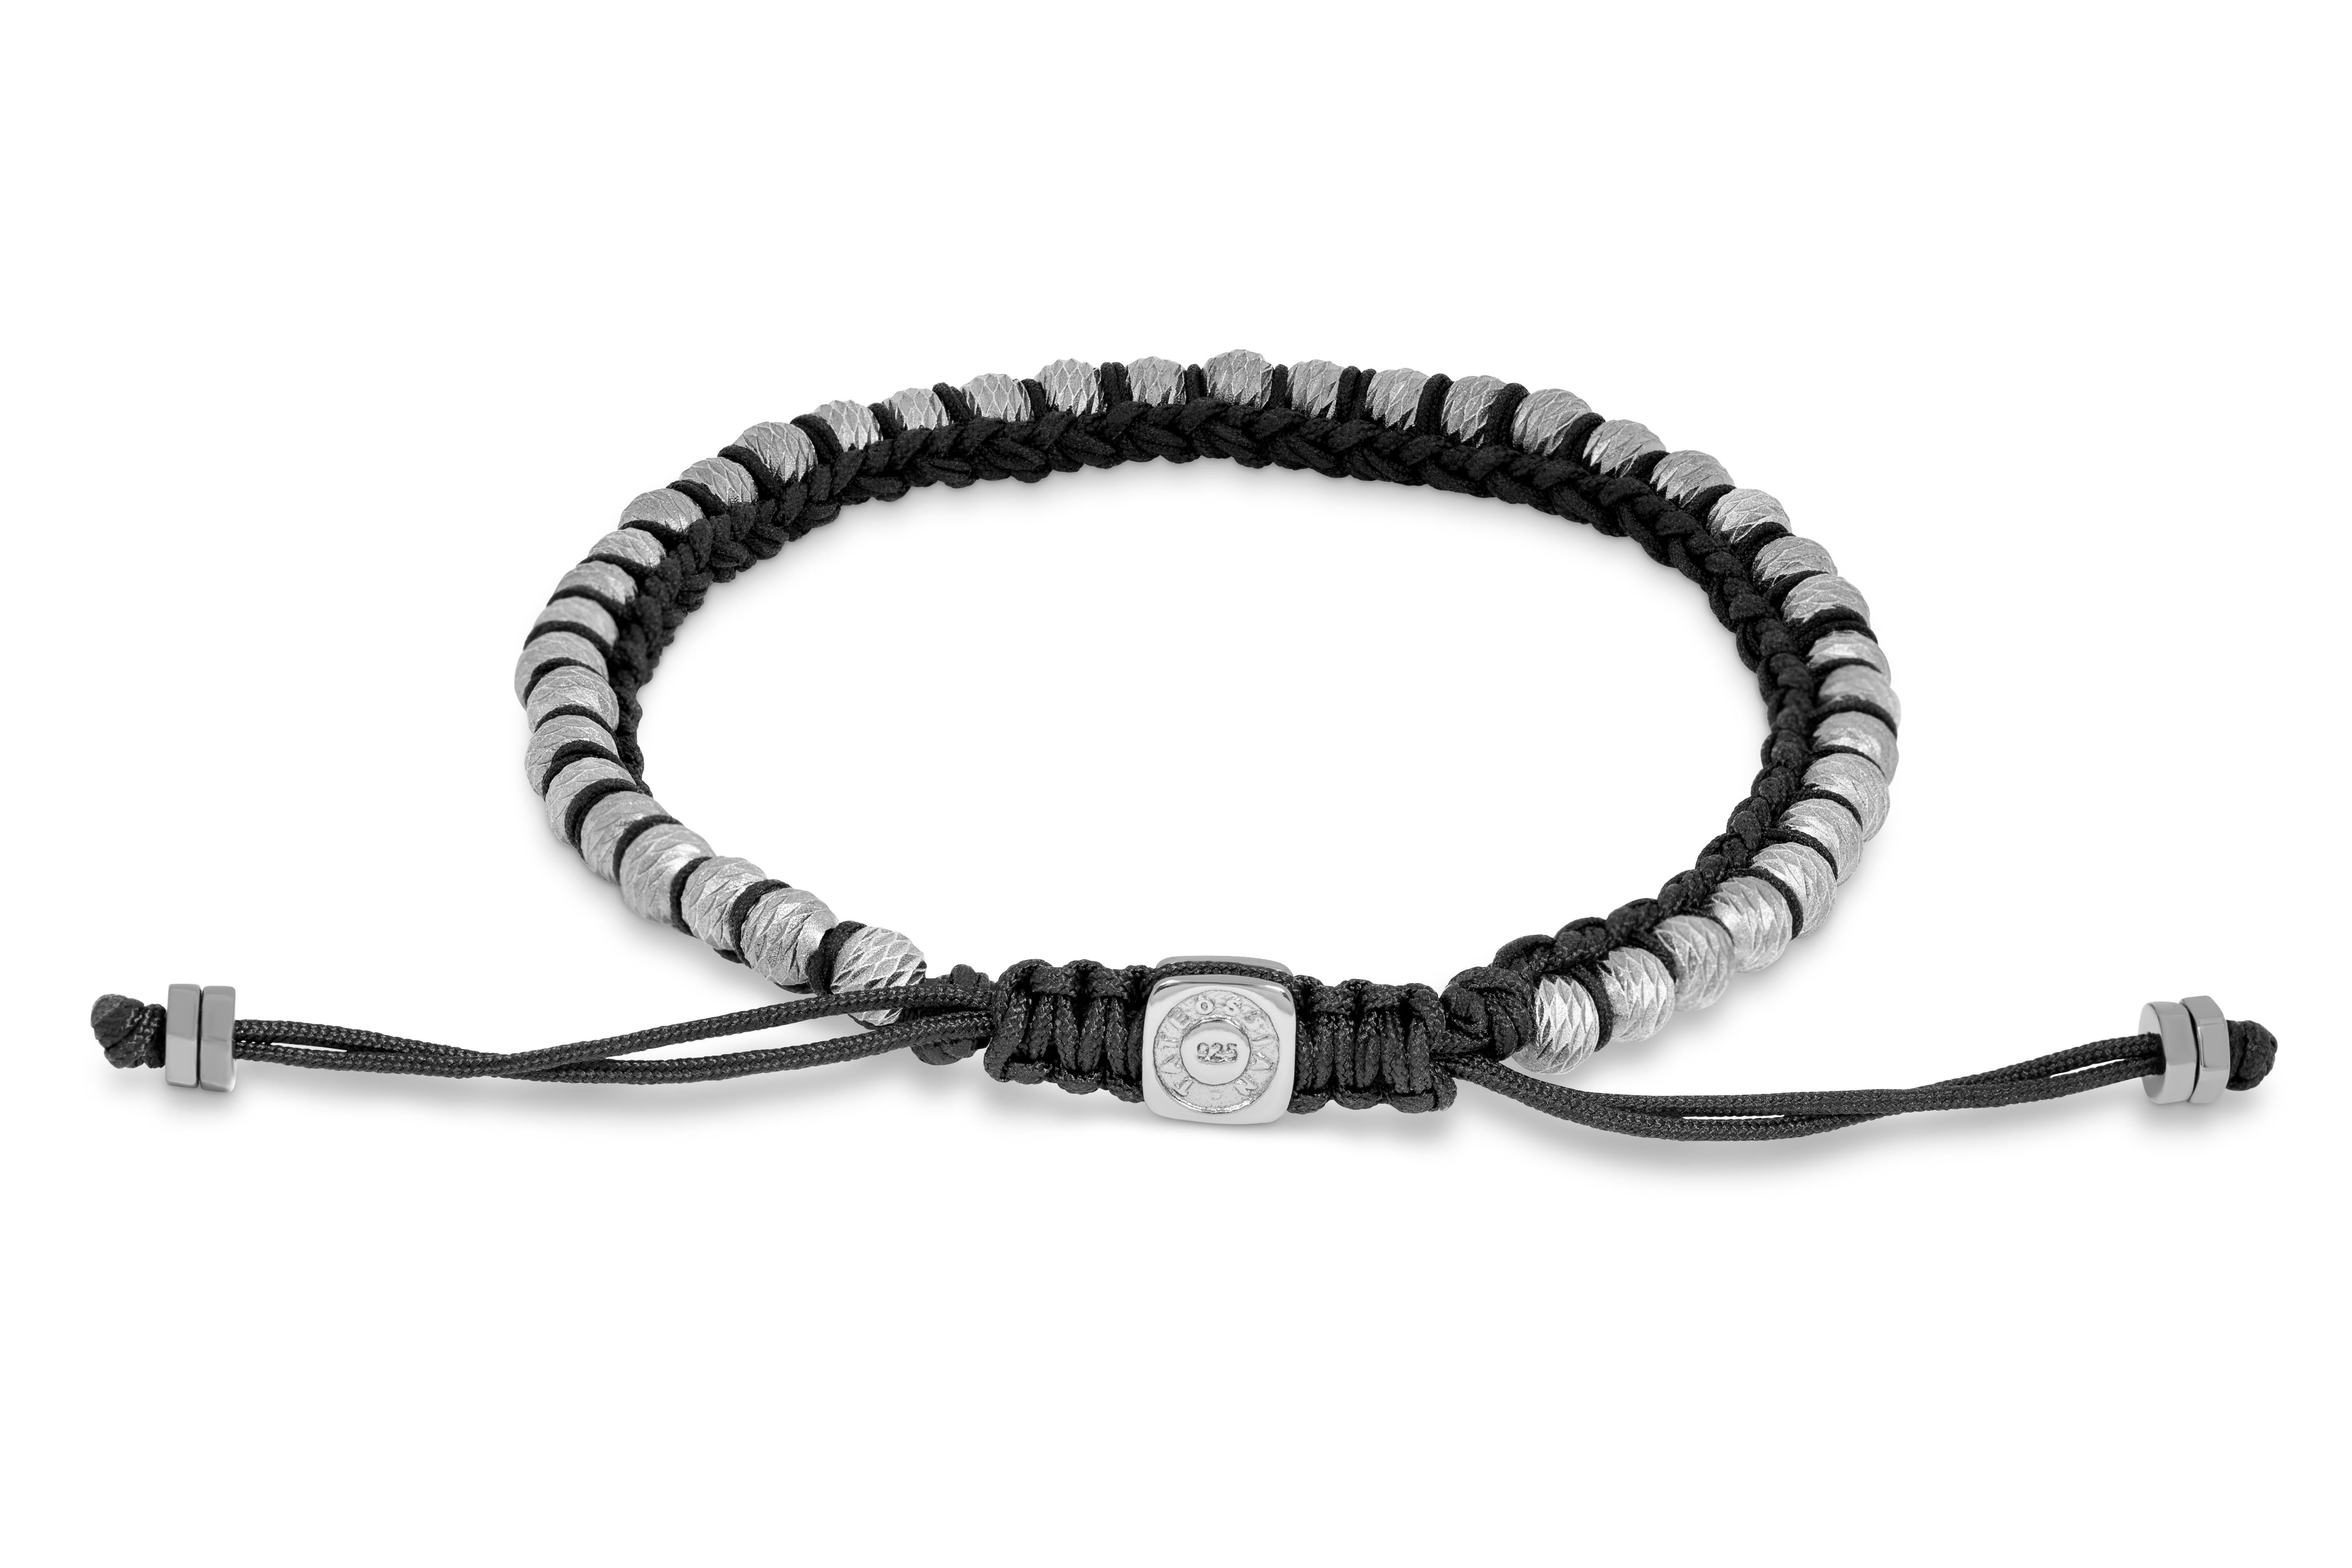 Men's Sennit Classico Bracelet in Macrame with Rhodium-Plated Sterling Silver, Size L For Sale